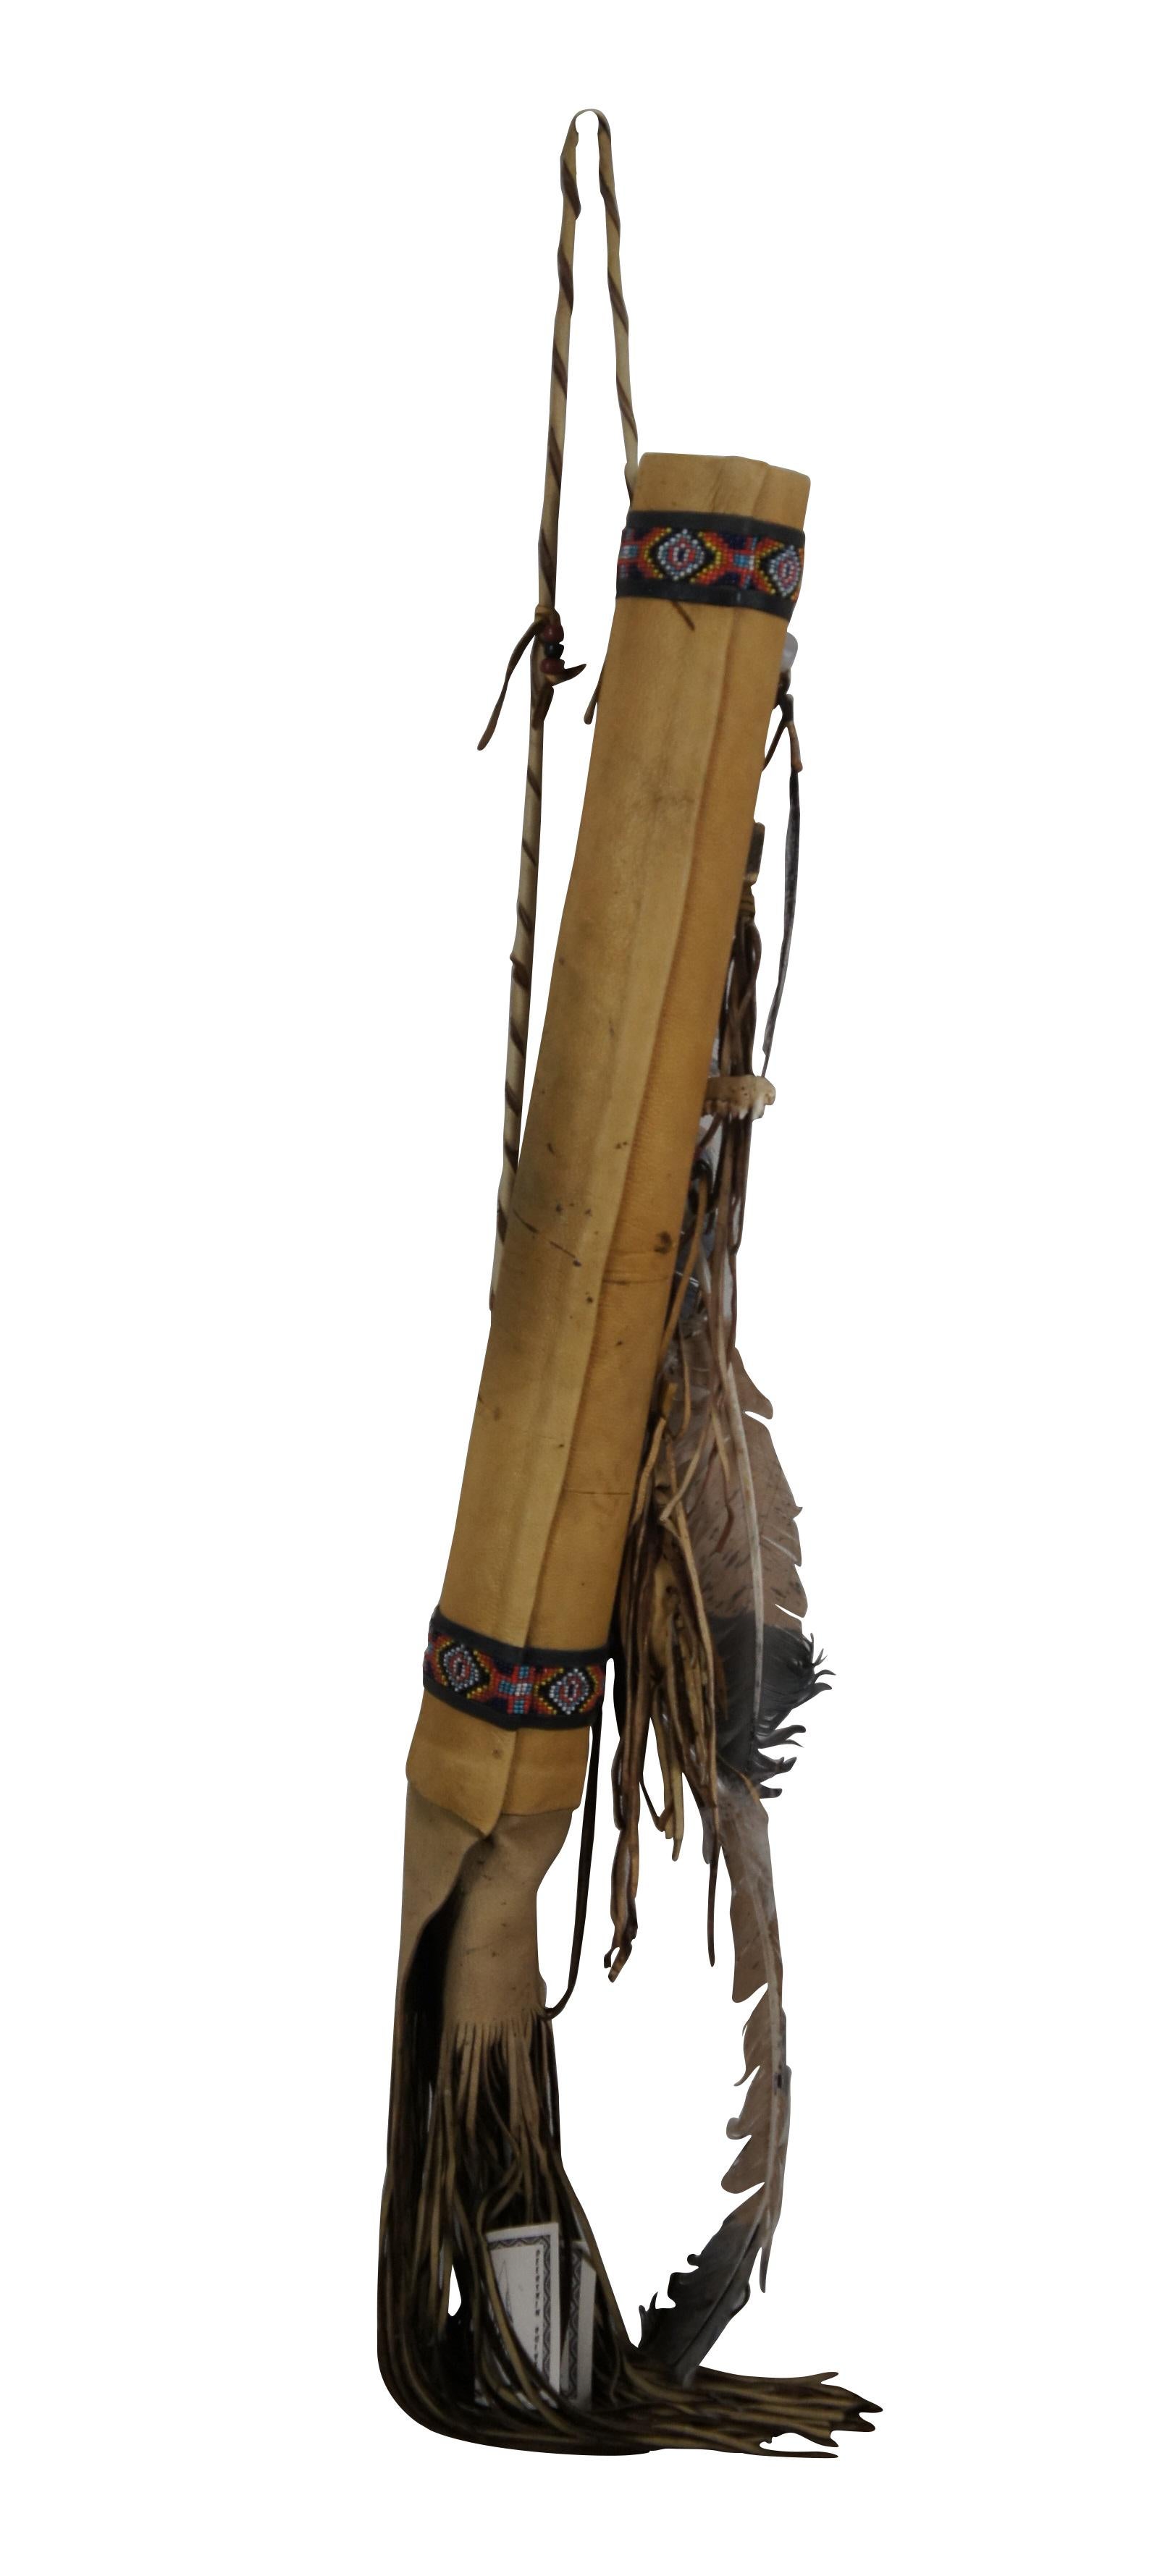 Late 20th century Native American deerskin leather quiver. Beaded bands around top and base, soft leather fringe at bottom, decorated with feathers, beads, several pieces of animal bone, quartz prism, arrowhead and medicine bag. Crafted by Jannee